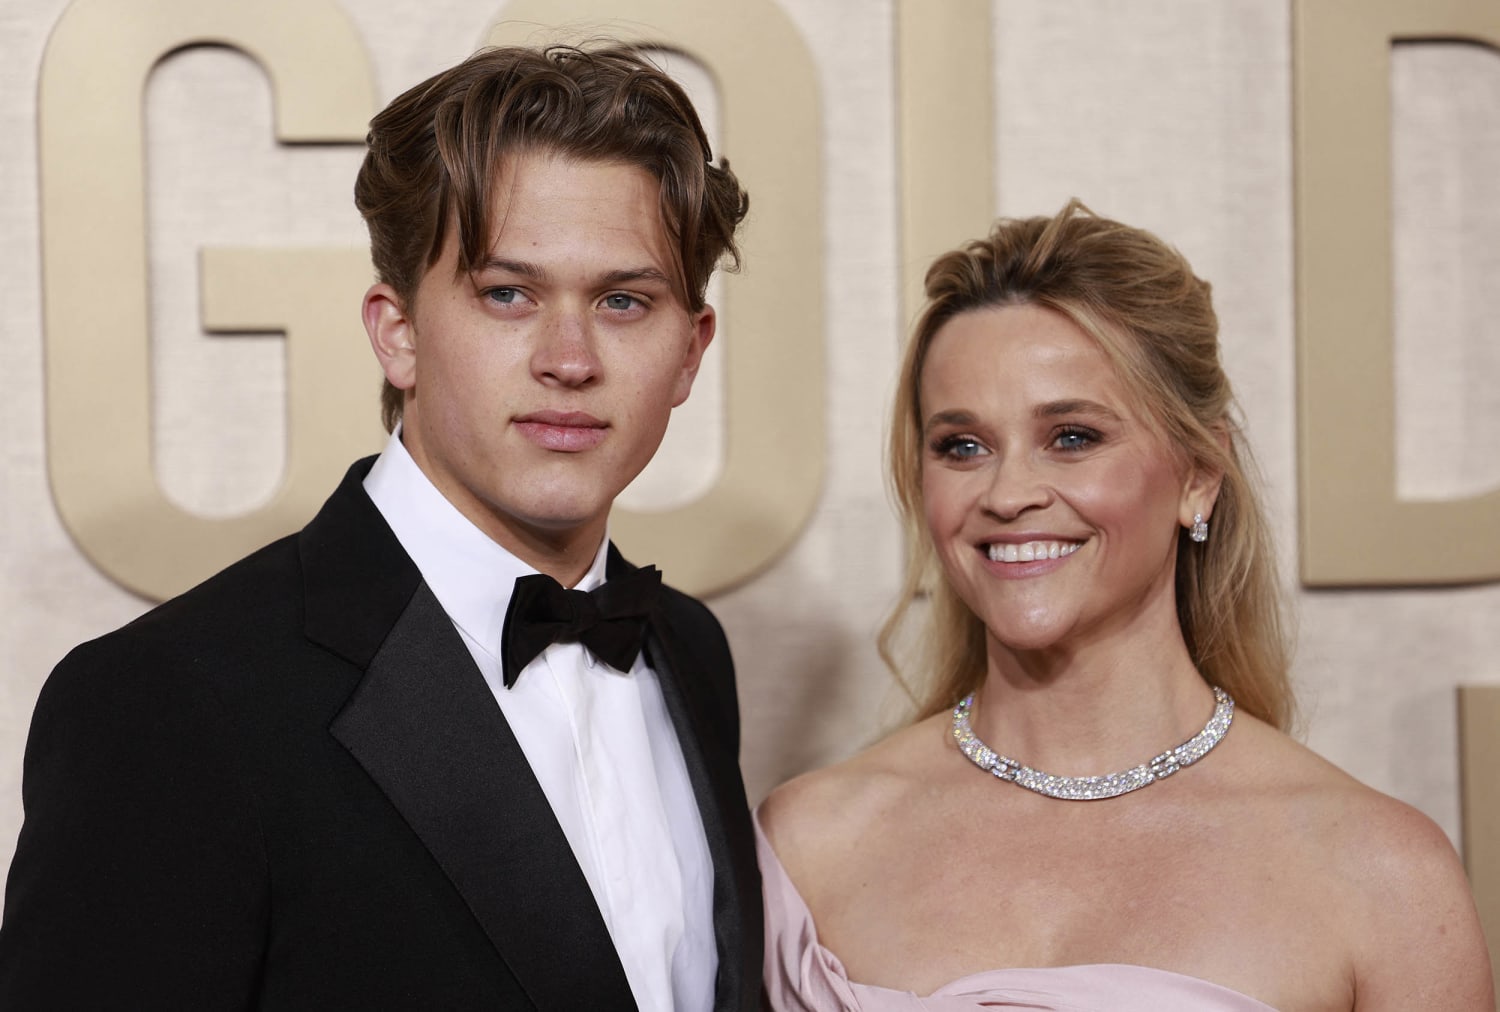 Fans are loving this red carpet moment when Reese Witherspoon's son Deacon helped fix her hair